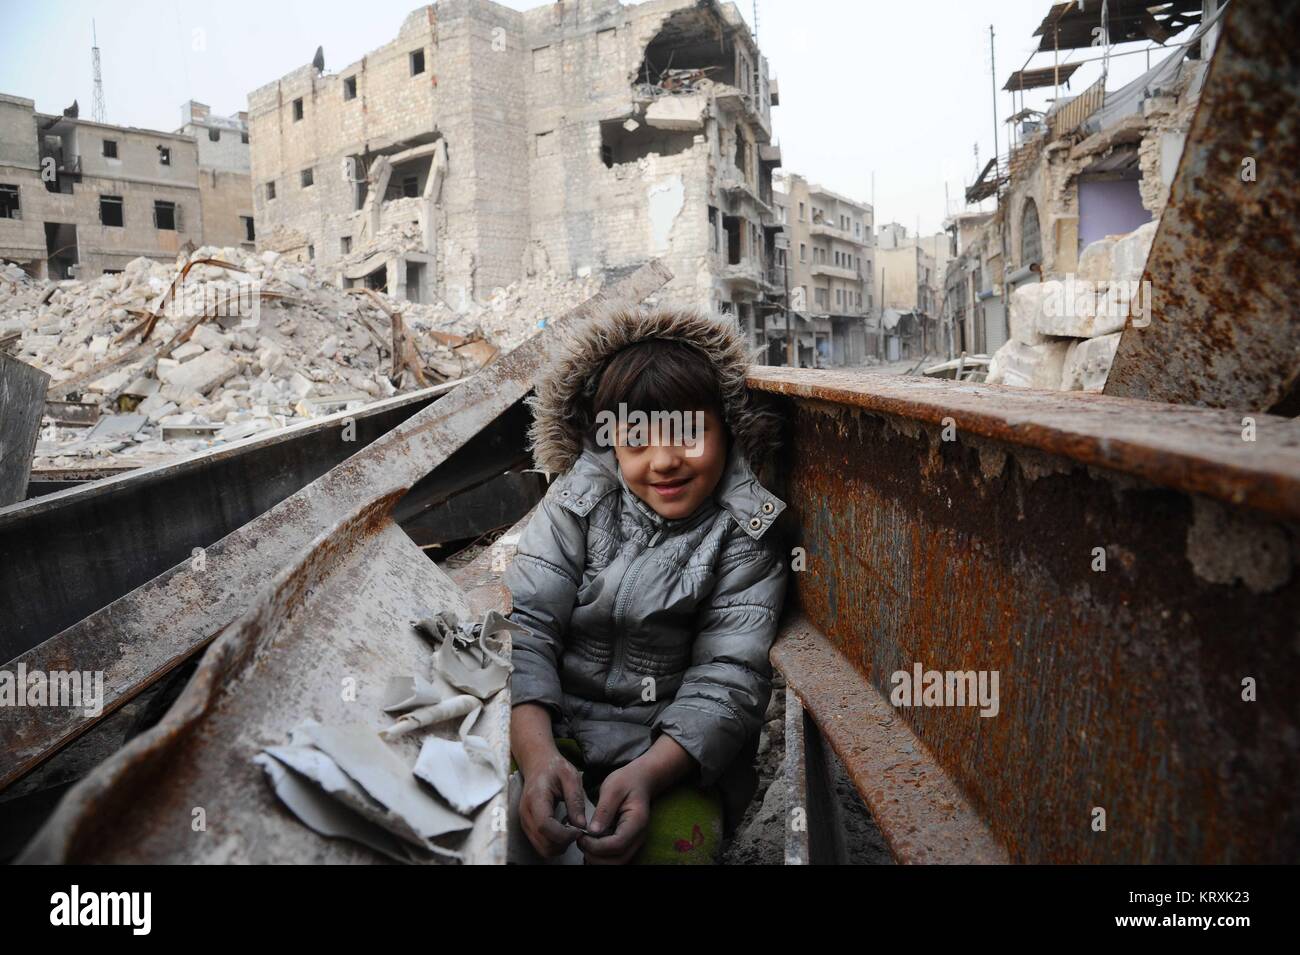 Aleppo. 21st Dec, 2017. A boy plays amid the rubble in the largely destroyed part of Aleppo city in northern Syria, Dec. 21, 2017. Last year's battle of Aleppo was so cubical and a turning point in the course of actions in the Syrian crisis, due to the strategic importance of the city, which was the economic capital of Syria and where most of the country's industry was located. Credit: Ammar Safarjalani/Xinhua/Alamy Live News Stock Photo